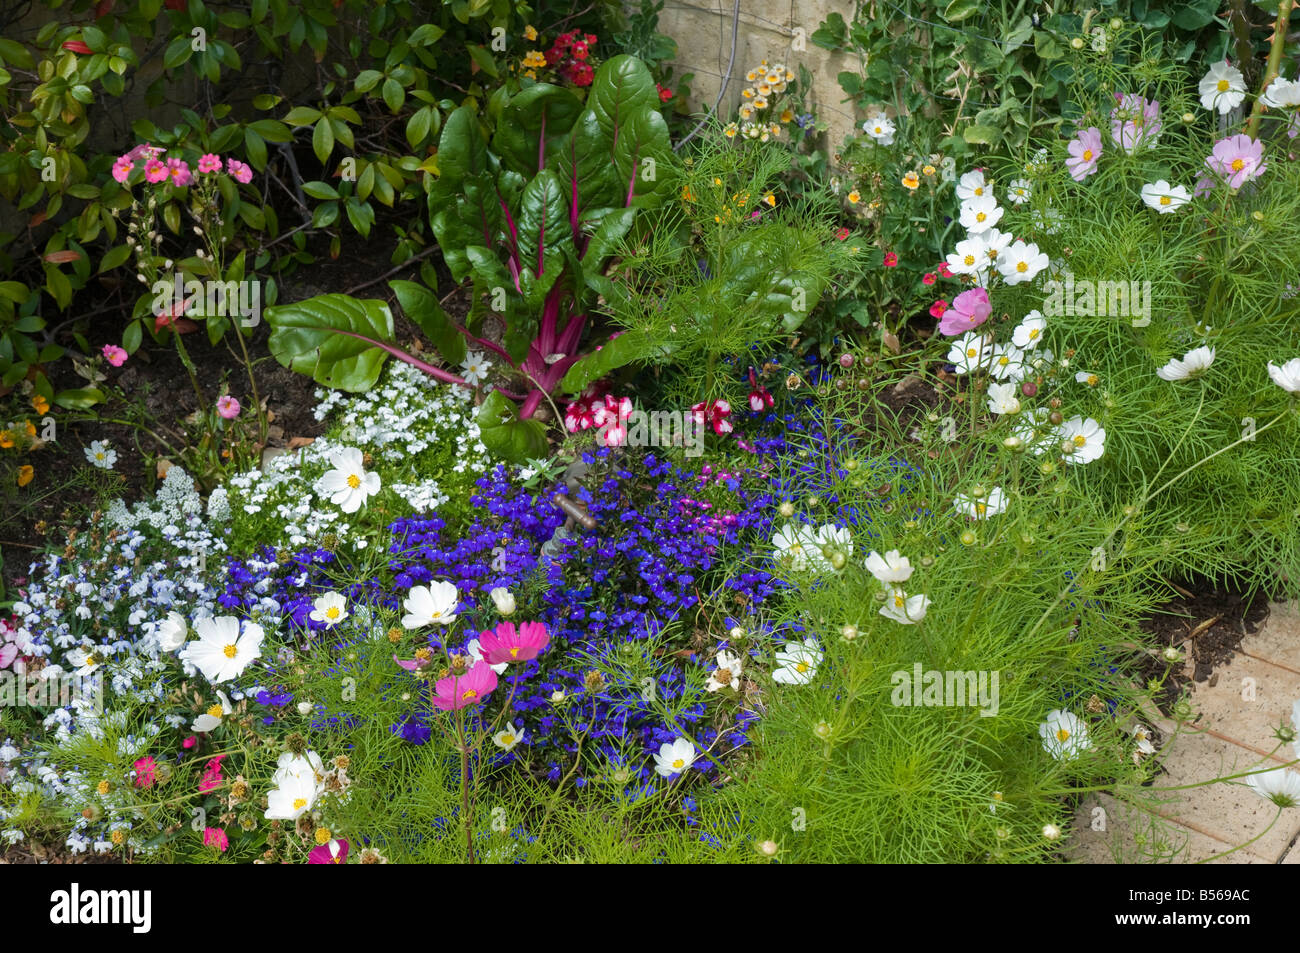 An undisciplined and colorful bed of mixed flowers including red stemmed silver beet used in a decorative manner Stock Photo